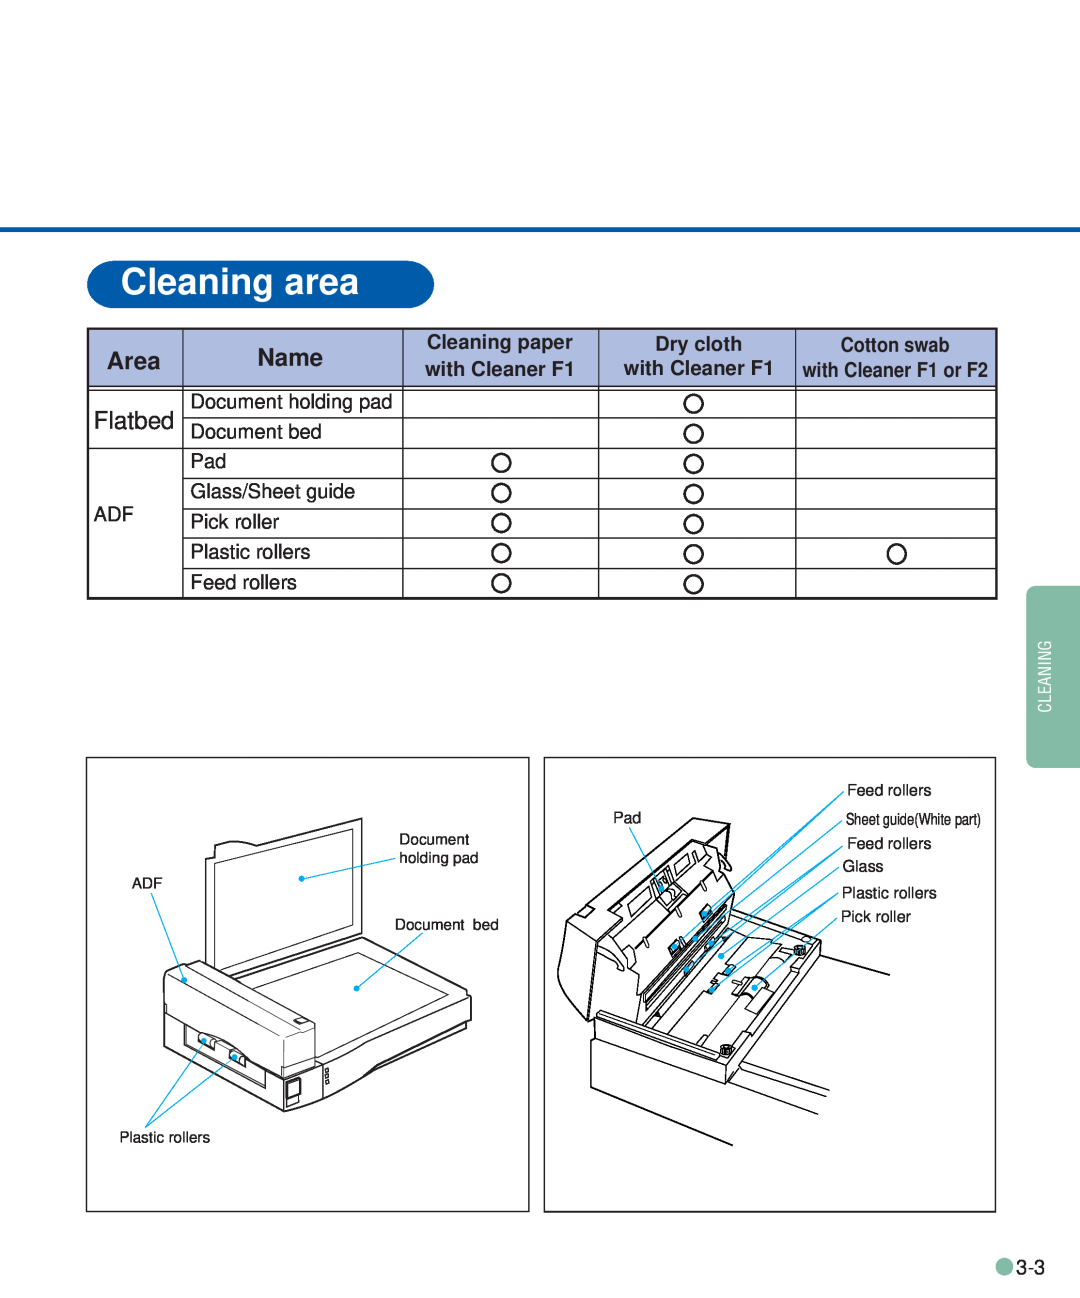 Fujitsu M3093DE/DG manual Cleaning area, Area, Name, Flatbed, Cleaning paper, Dry cloth, with Cleaner F1, Cotton swab 